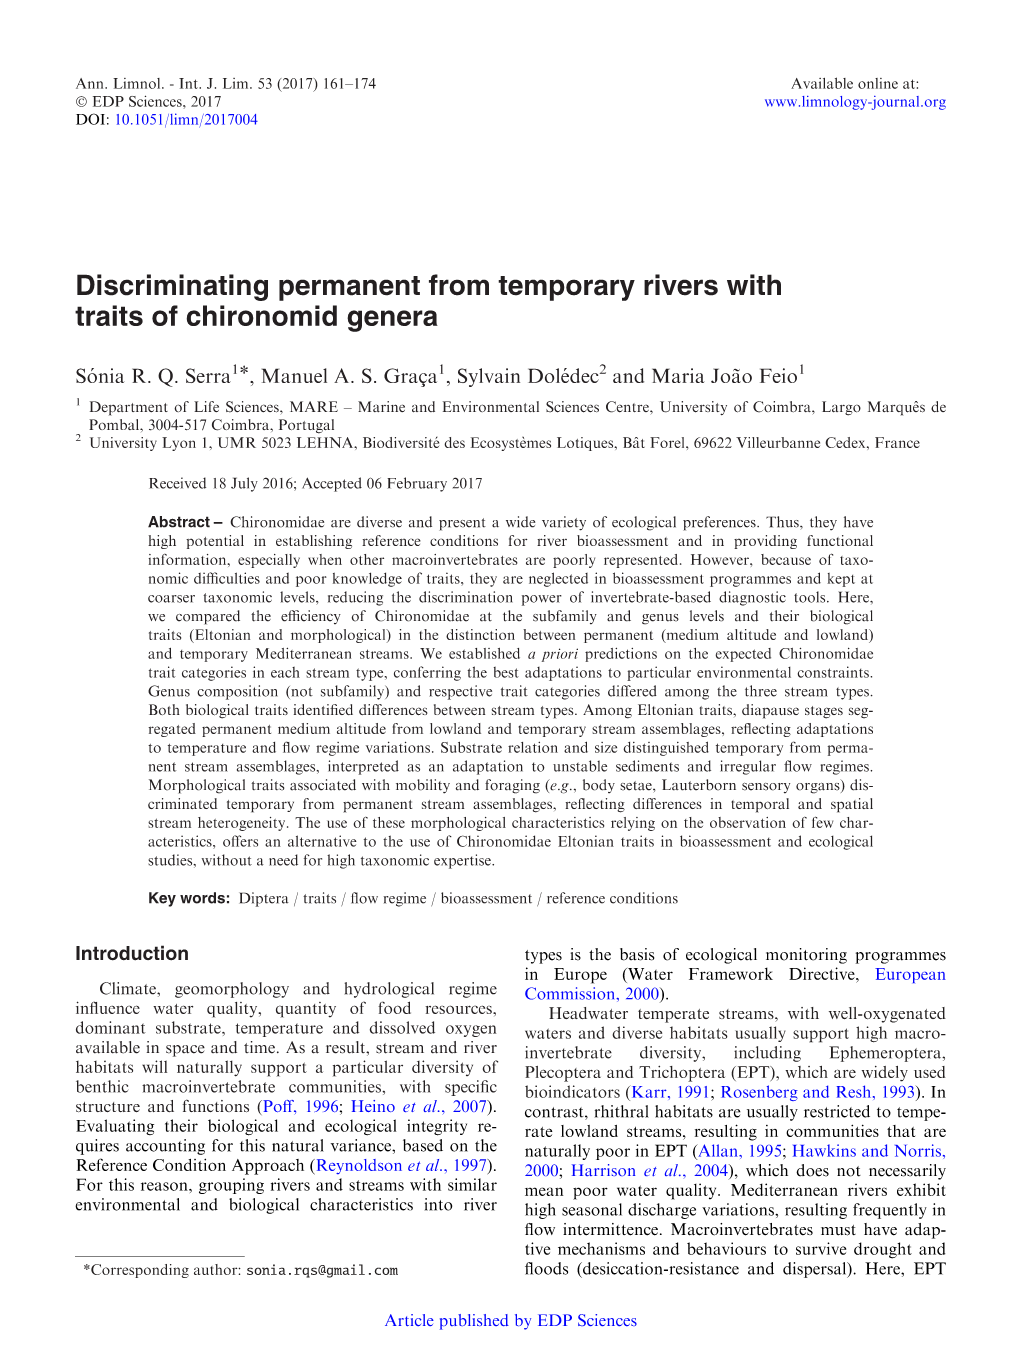 Discriminating Permanent from Temporary Rivers with Traits of Chironomid Genera